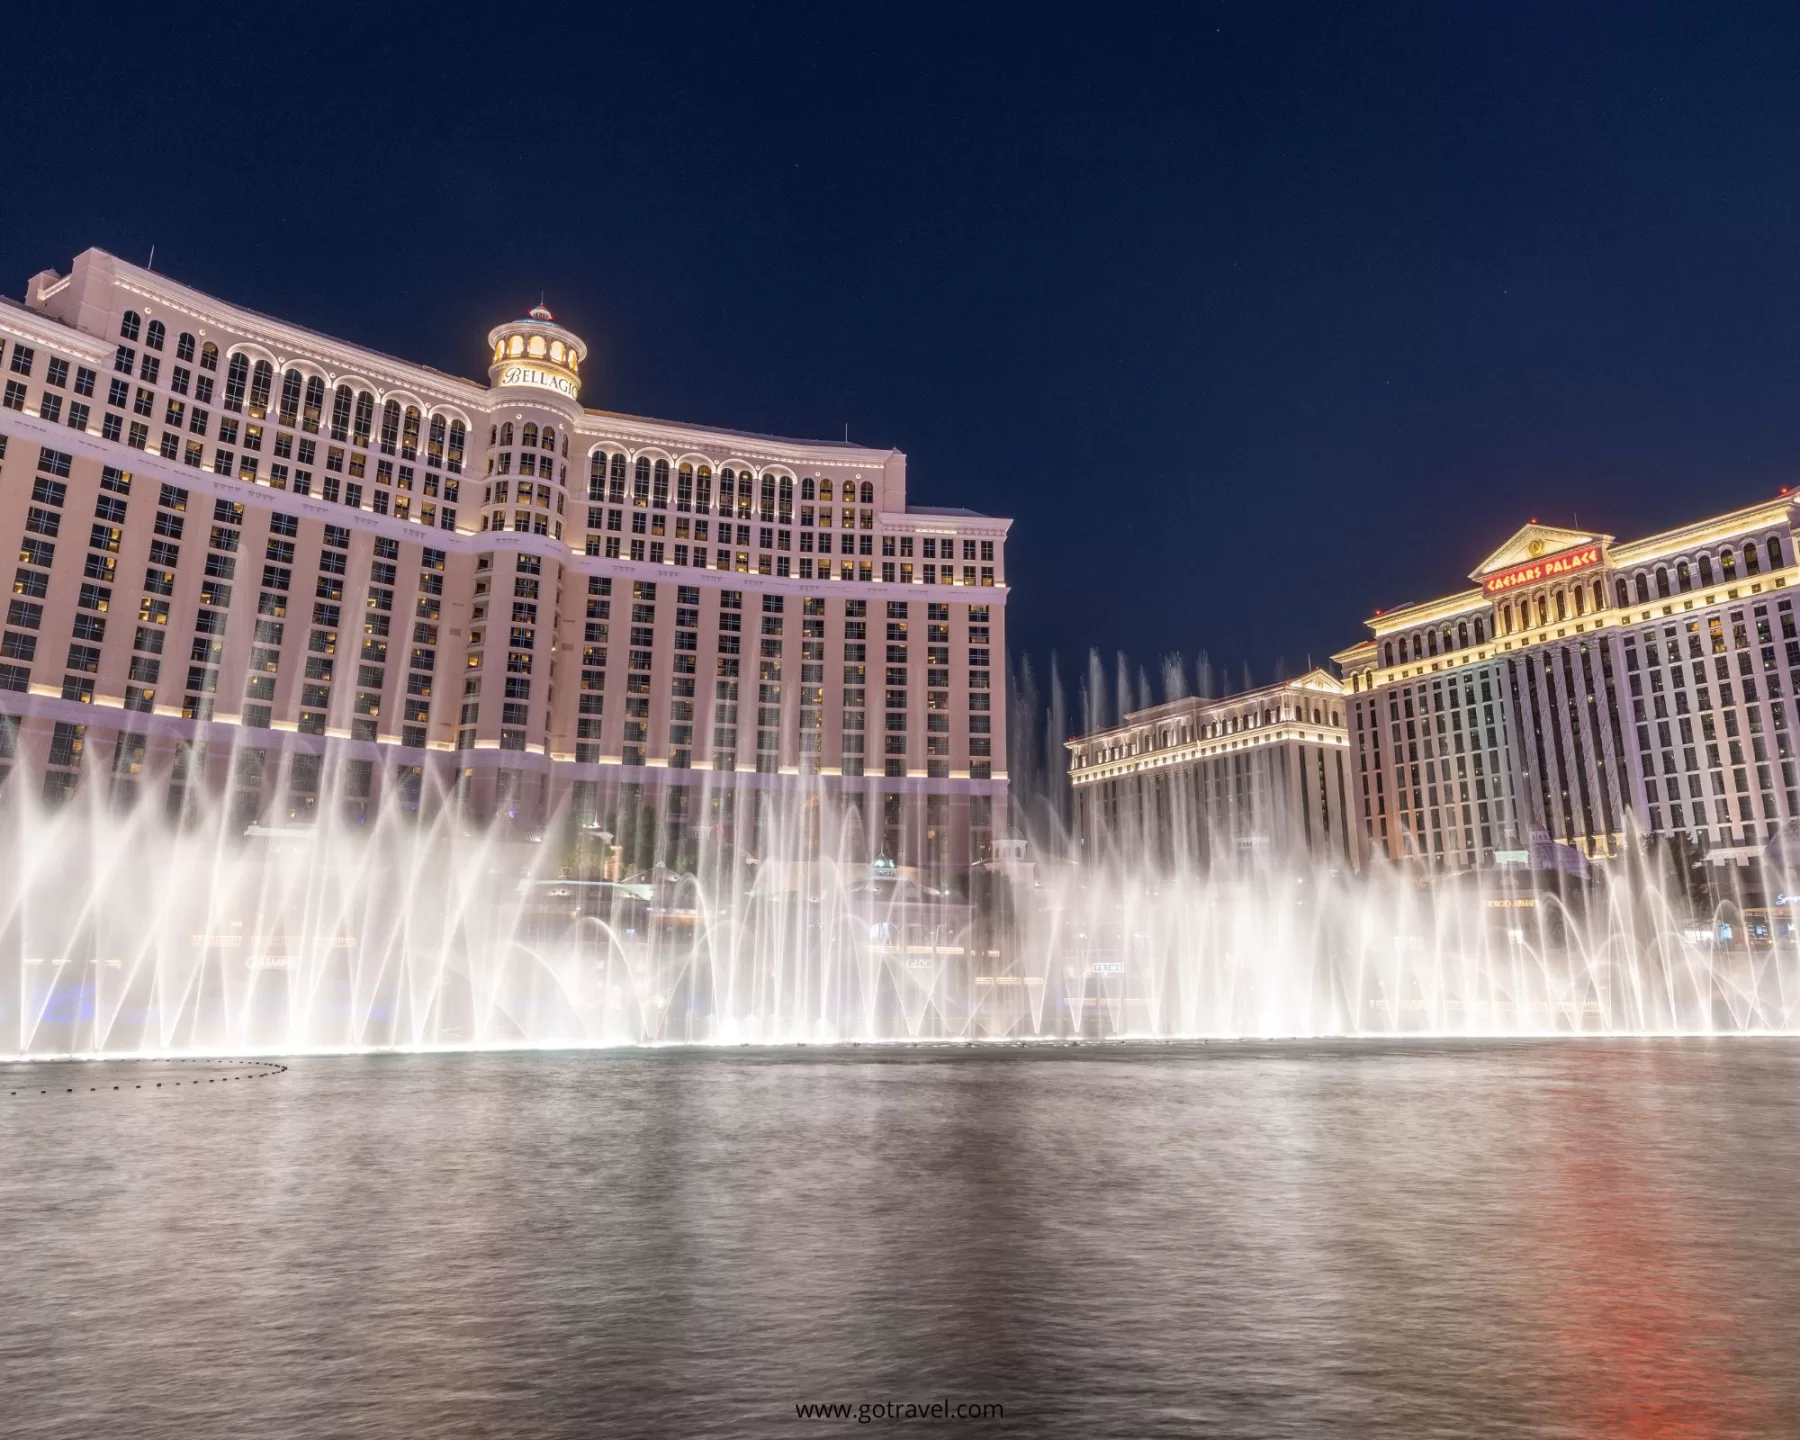 famous Bellagio Fountains. Located right on the Strip, these choreographed water displays are a sight to behold. From day to night, every 30 minutes or so, the fountains come alive with music and lights as they dance gracefully in sync with each other. It's a mesmerizing experience that will leave you breathless – all for free!